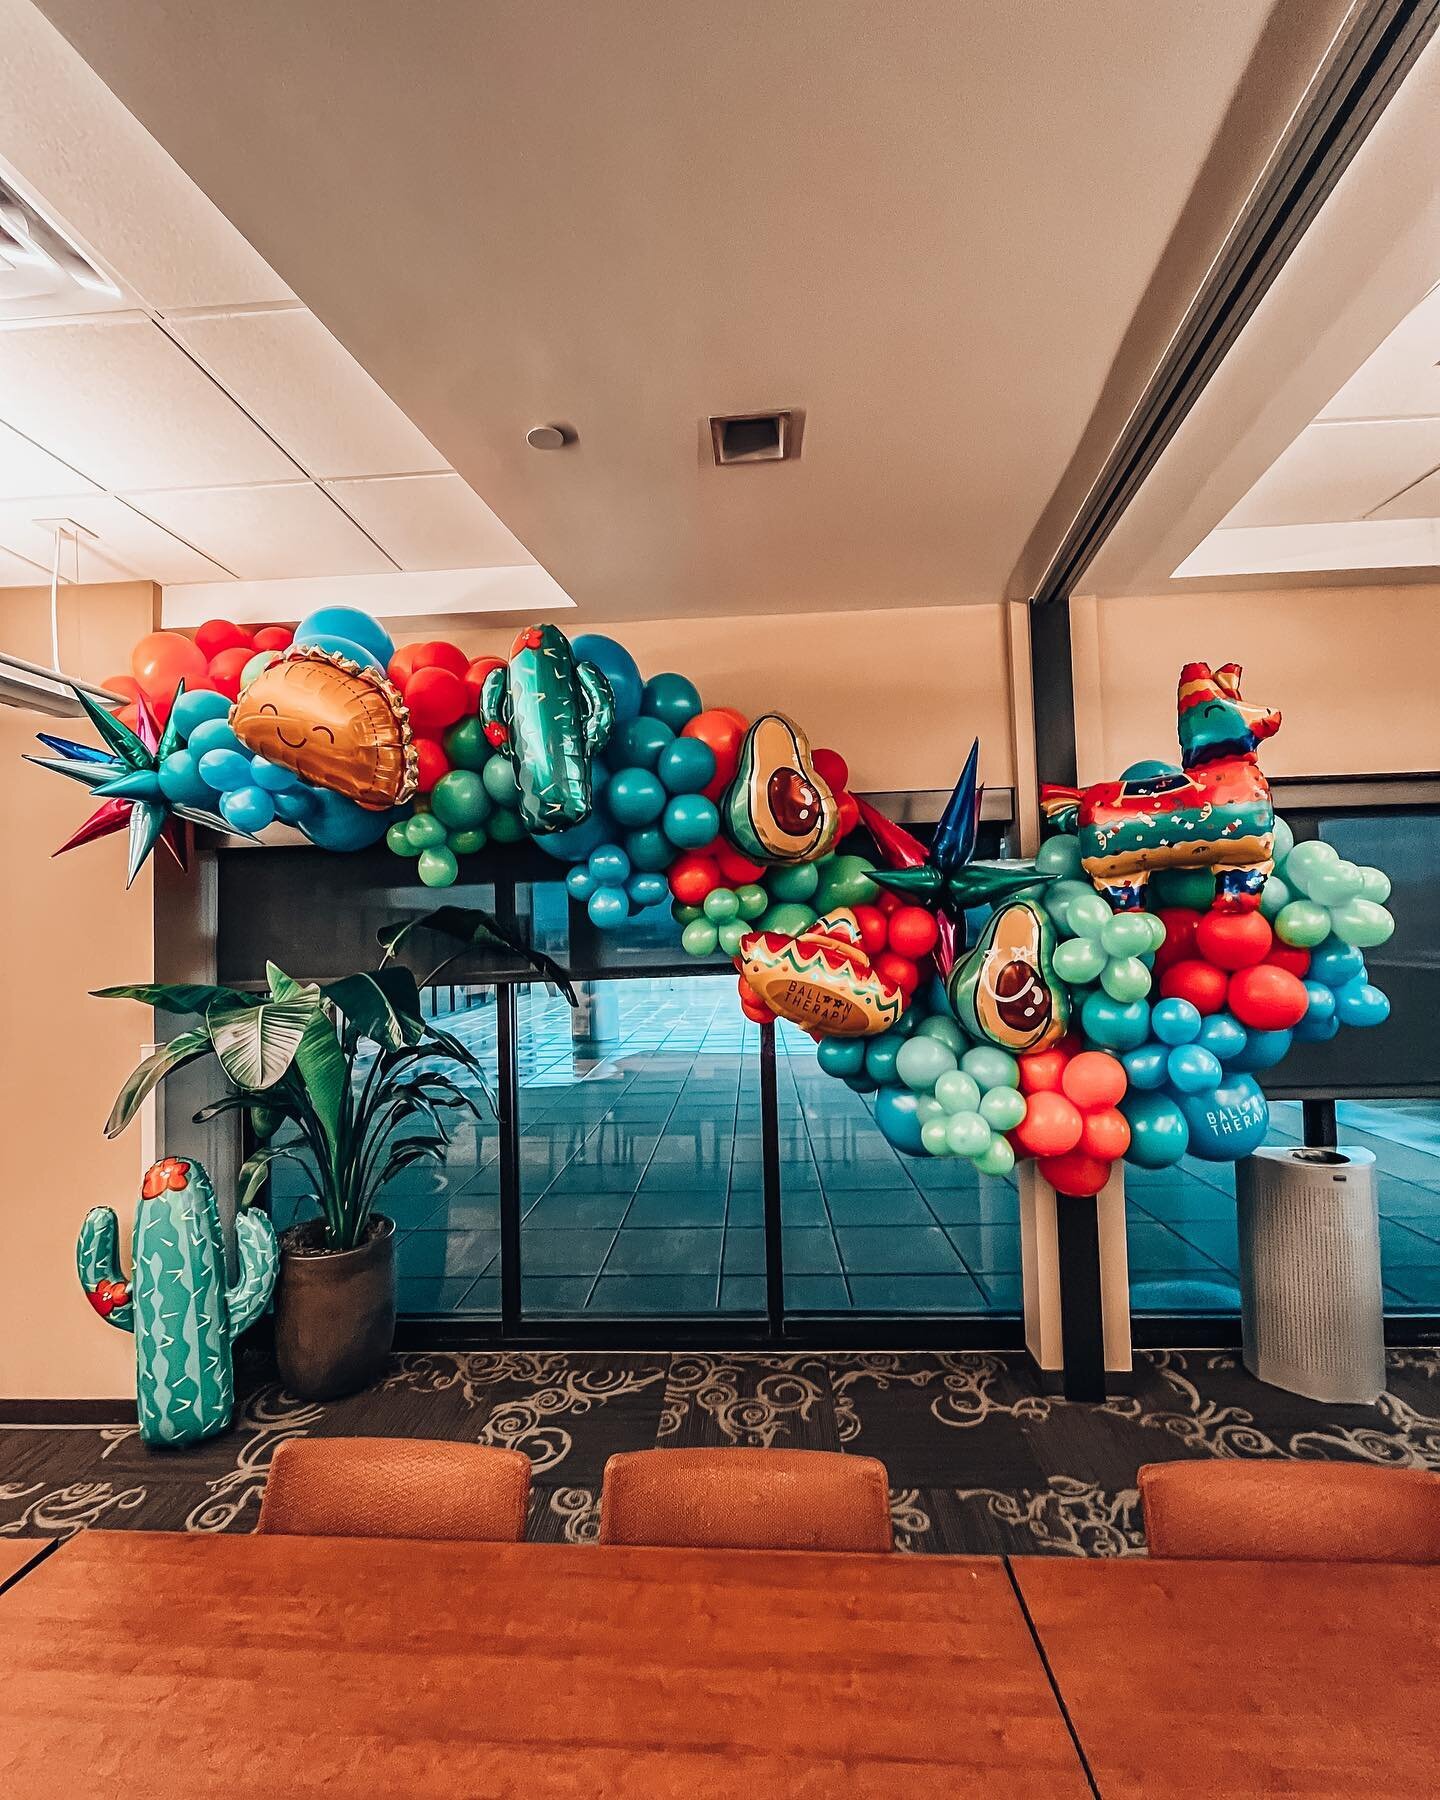 Nurses can fiesta too🥳🍹

Happy National Nurses Week to all the amazing nurses out there &amp; Feliez Cinco de Mayo!!!❤️💚🤍
&bull;
&bull;
&bull;
#balloontherapy #cincodemayo #nationalnursesweek #nurses #celebratenurses #stanthony